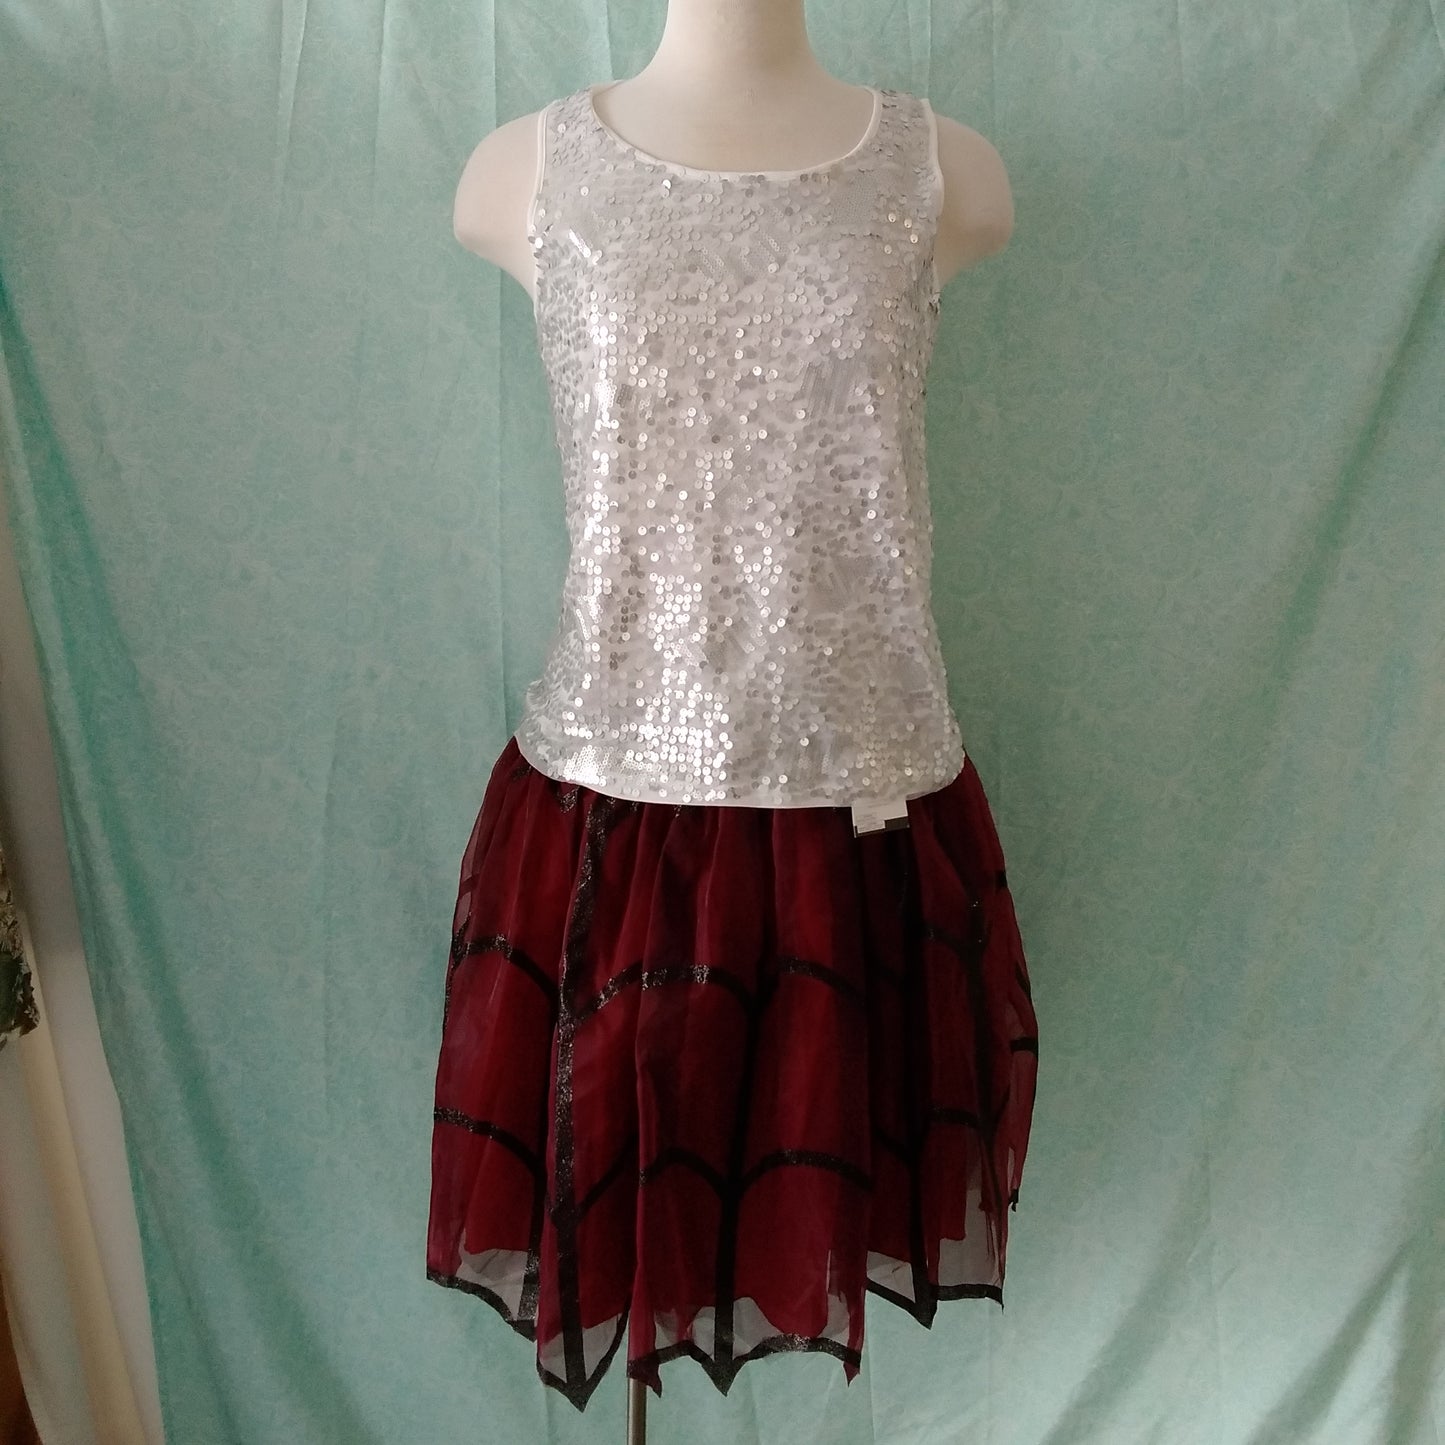 Burgundy and Black Adult Tutu NWT- One size fits most